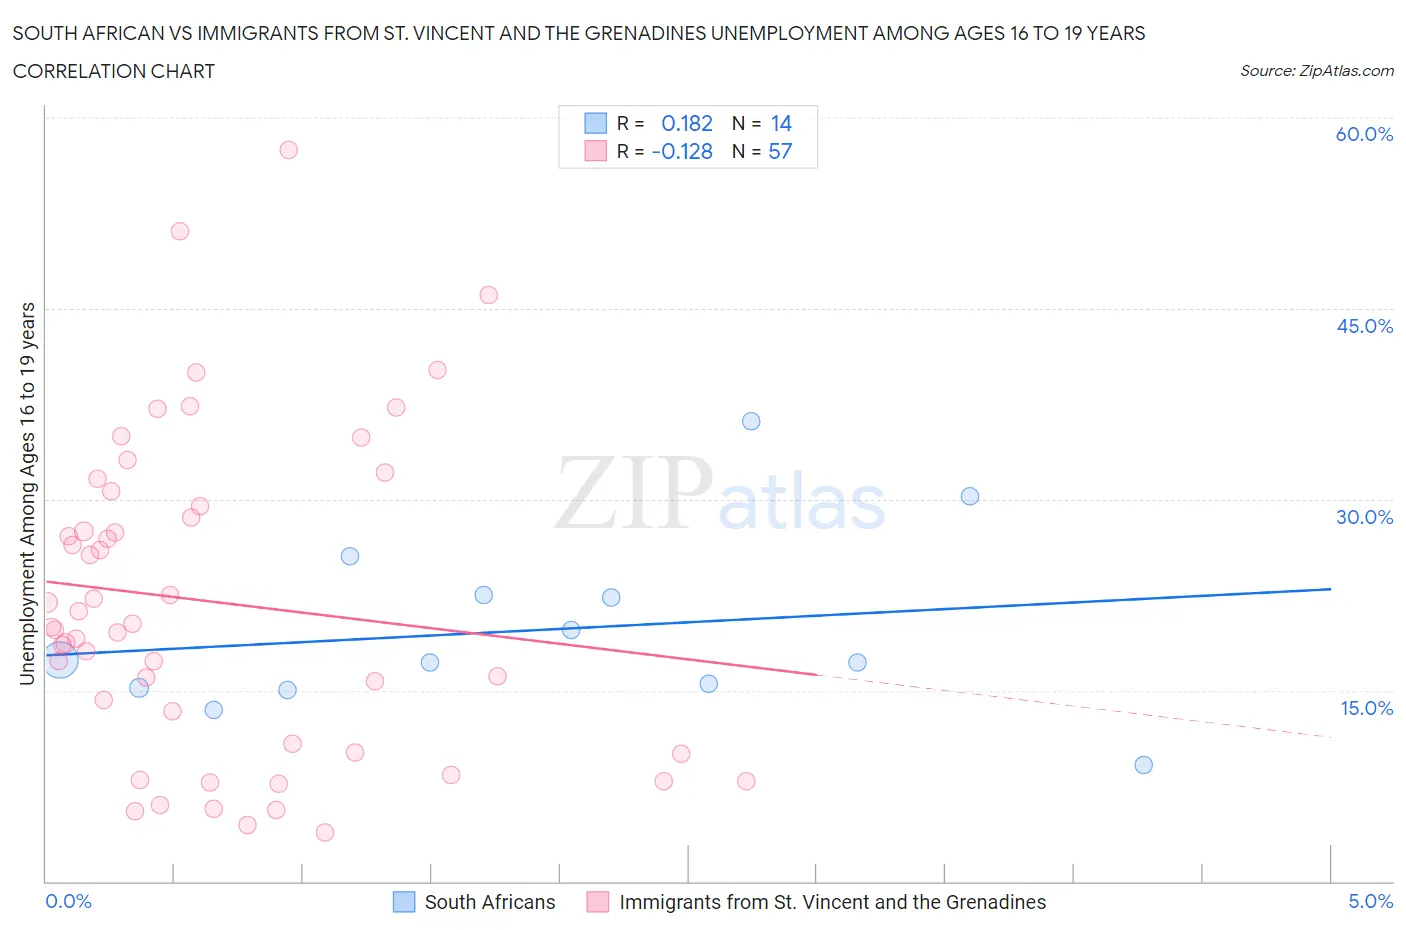 South African vs Immigrants from St. Vincent and the Grenadines Unemployment Among Ages 16 to 19 years